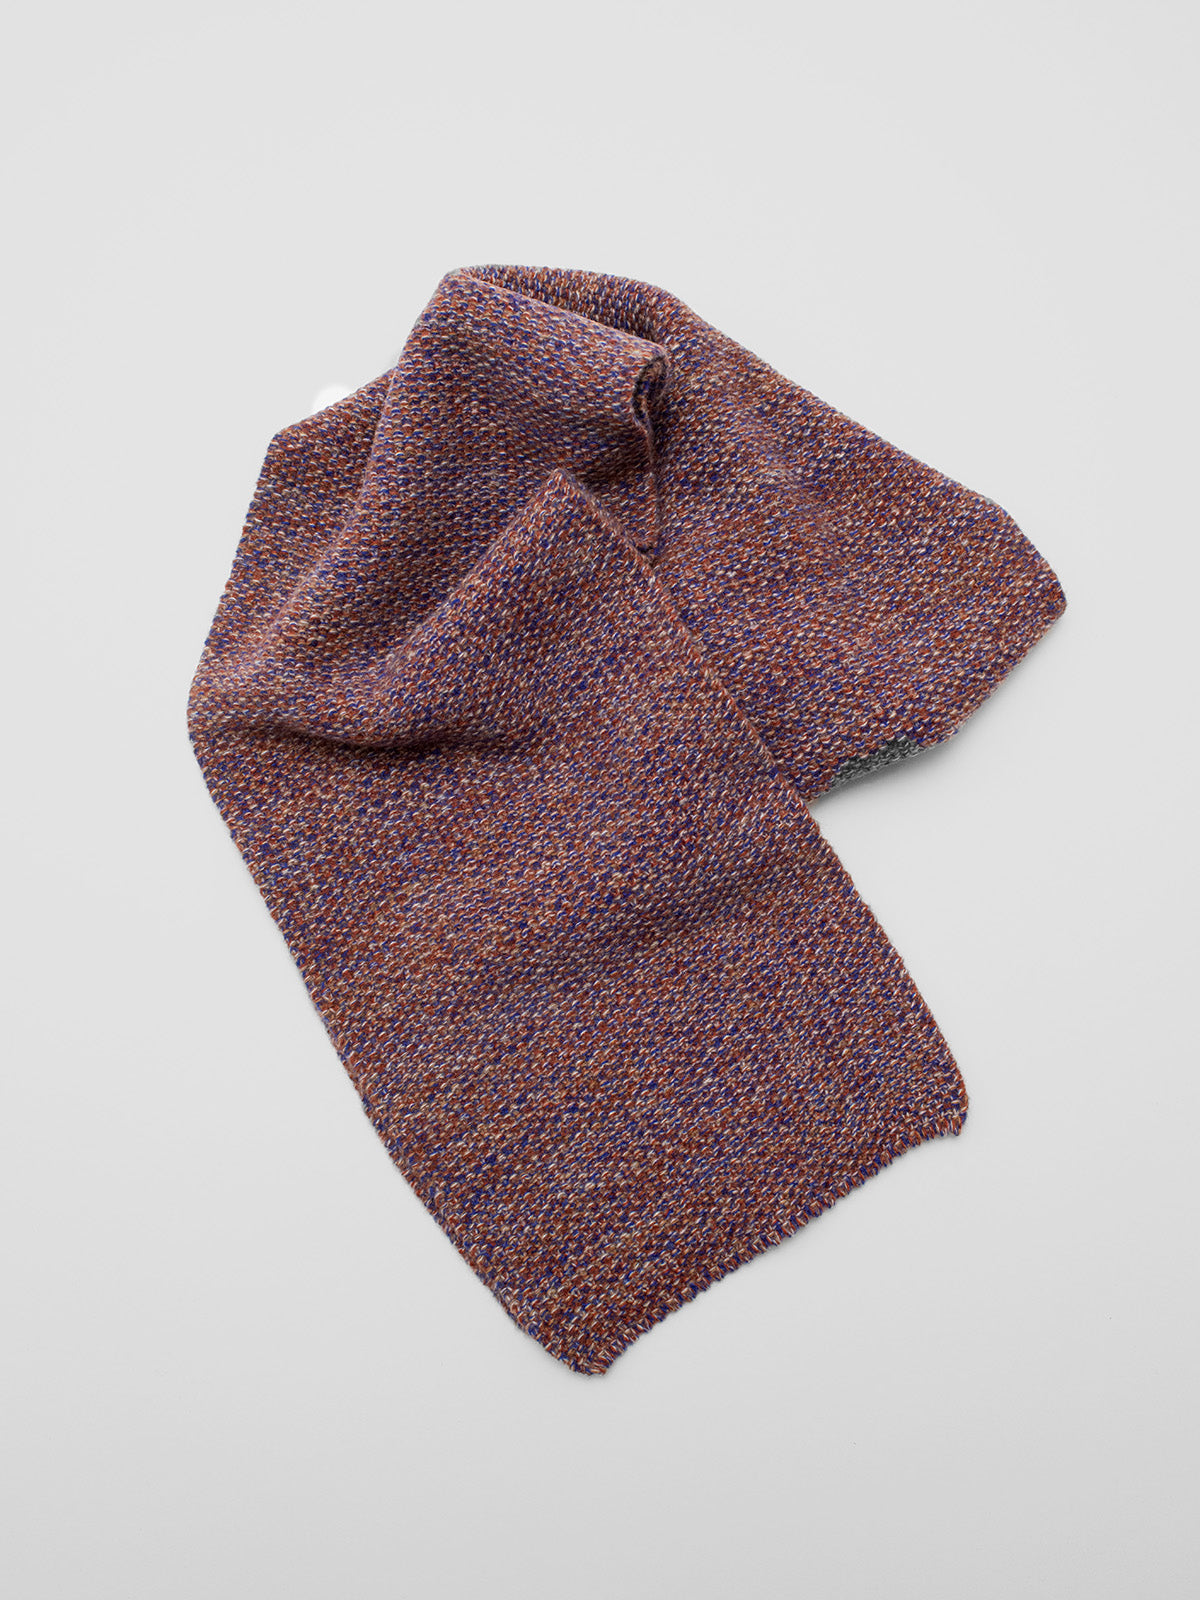 WILLIAM / SCARF / LAMBSWOOL / FAWN-COLORED